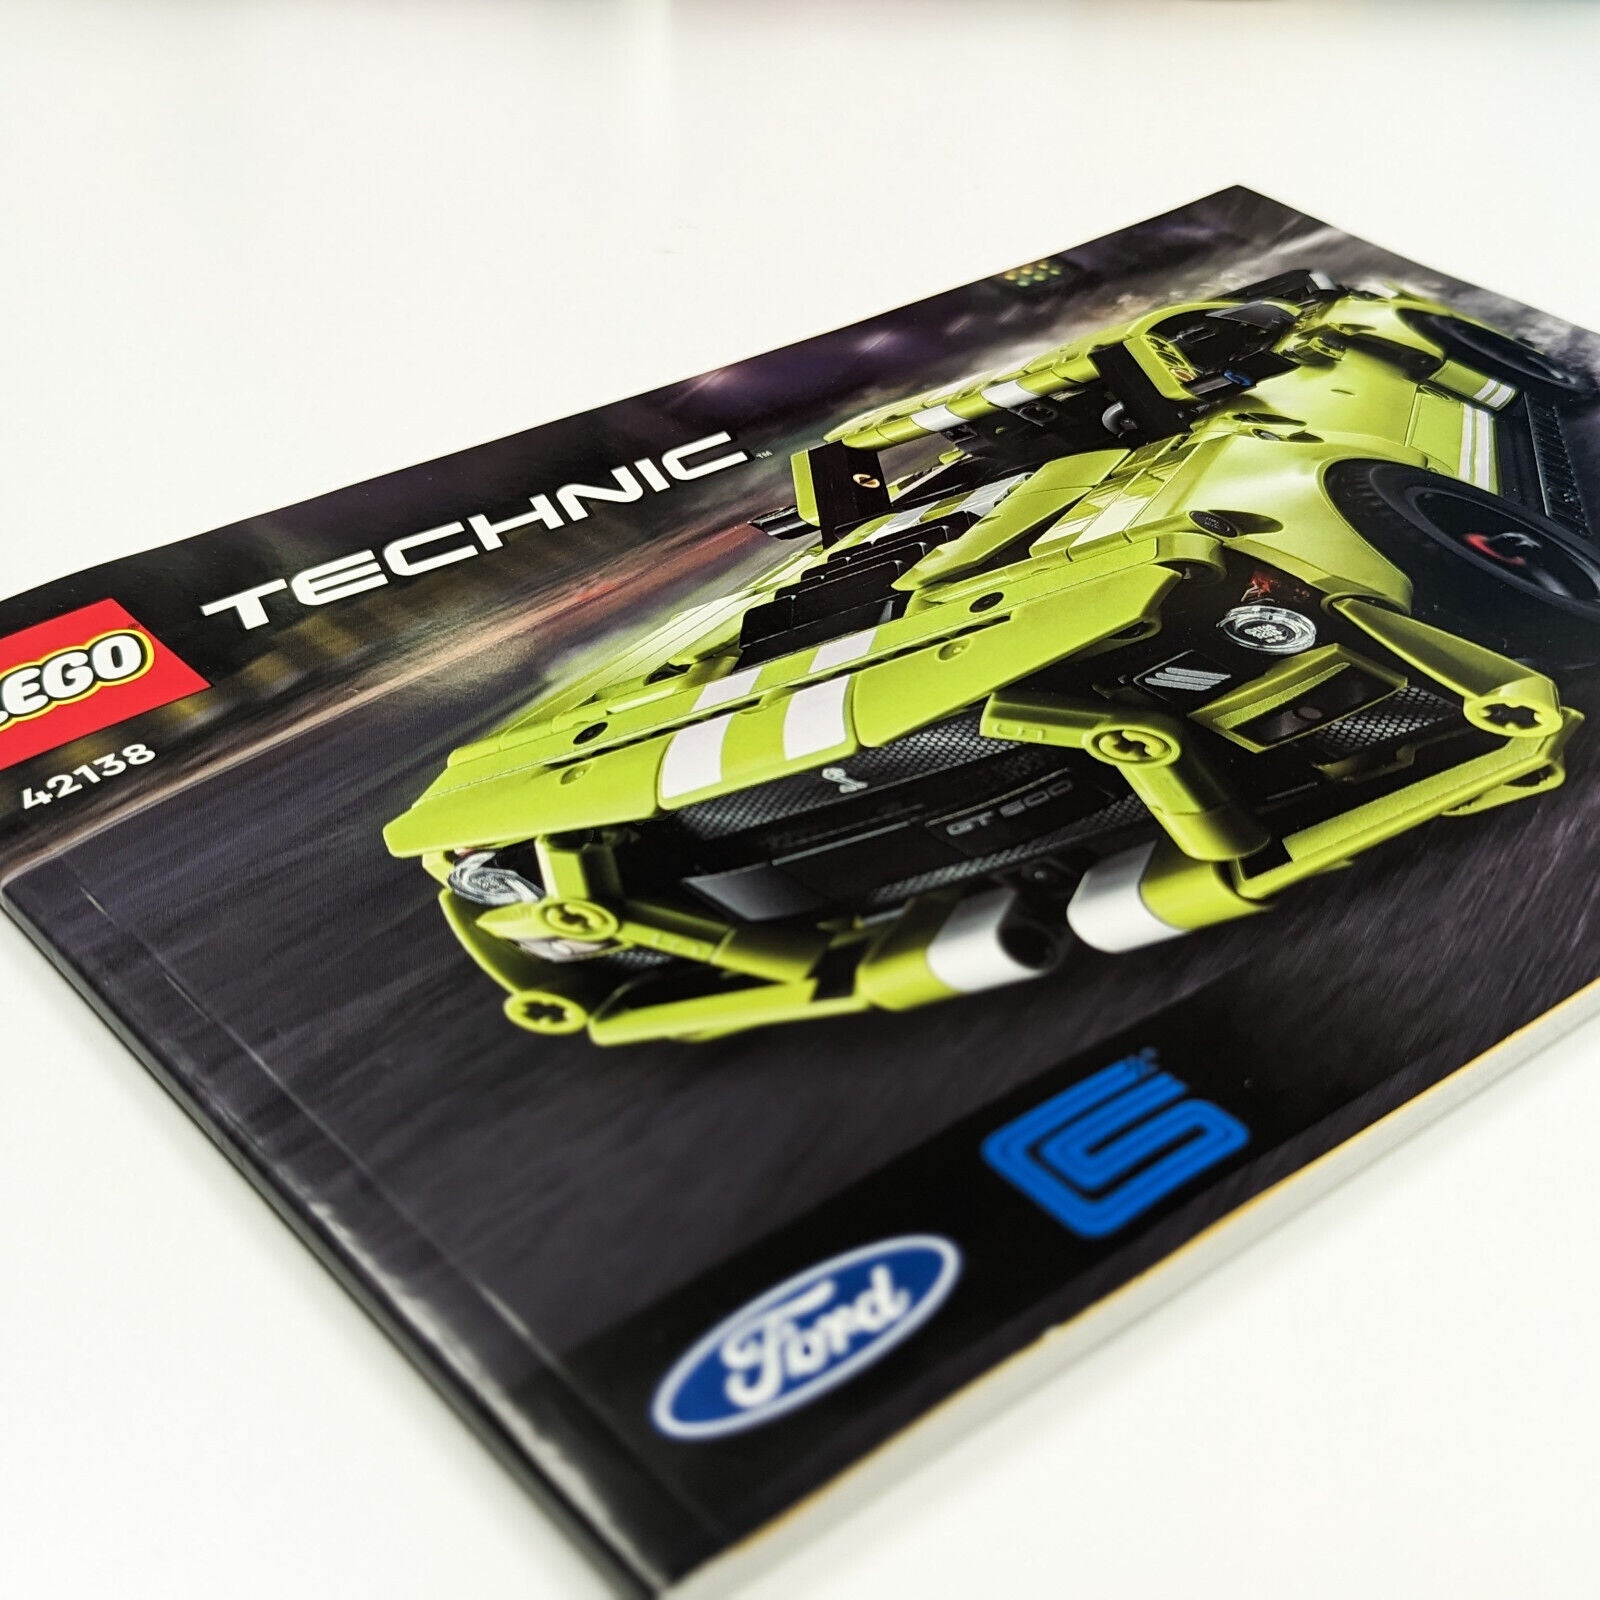 New LEGO Technic Ford Mustang Shelby GT500 42138 BOOKLET ONLY